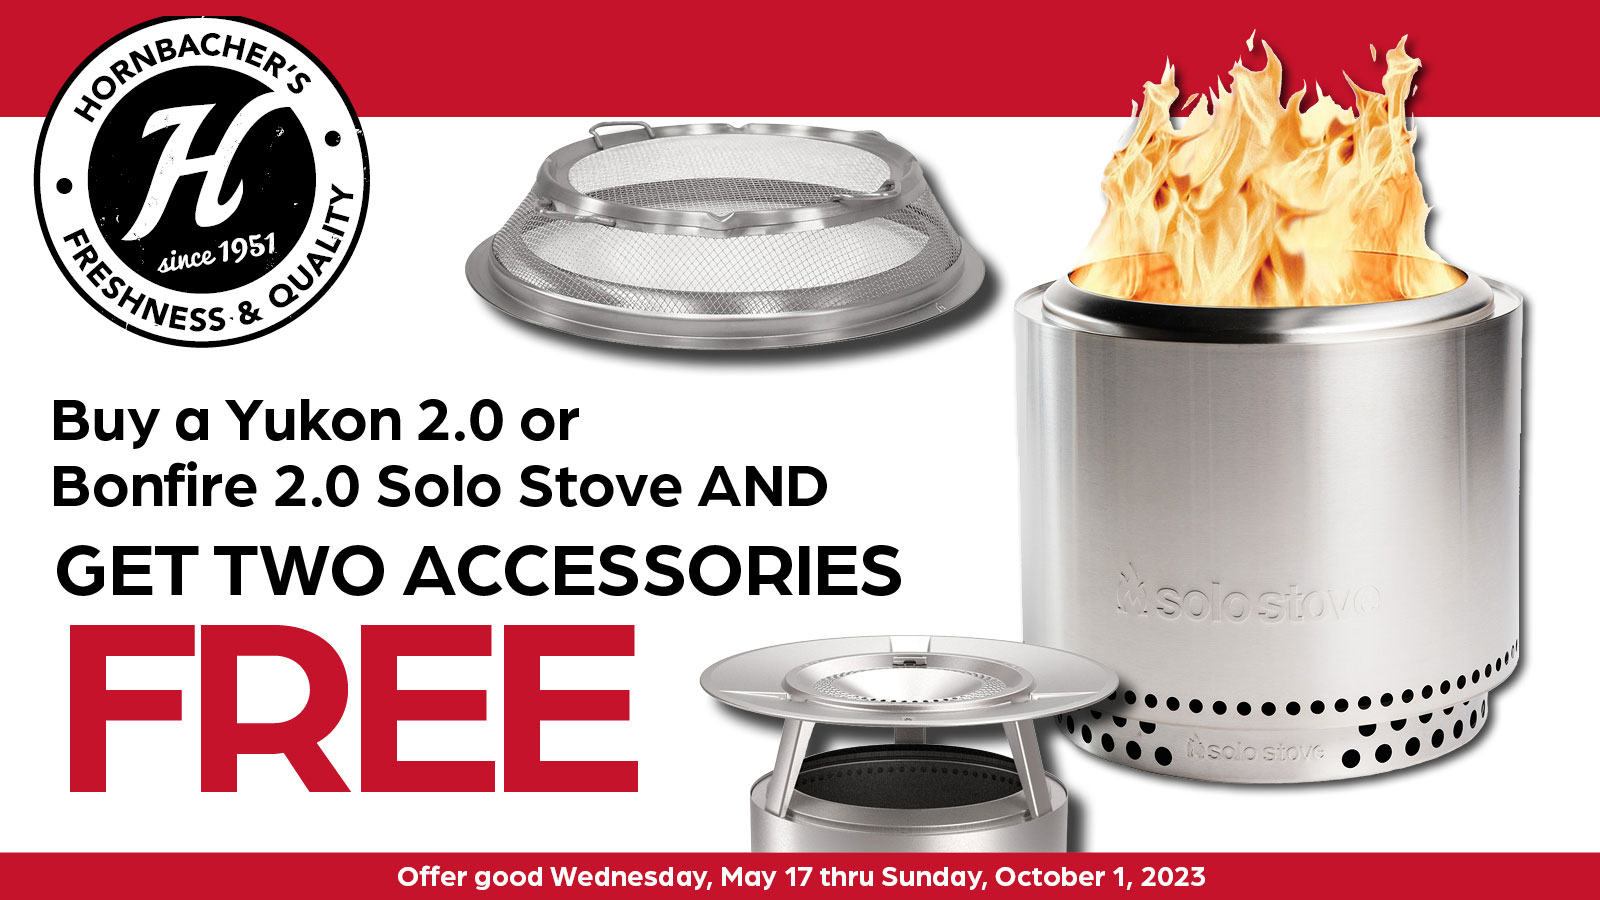 Buy a Yukon 2.0 or Bonfire 2.0 Solo Stove and Get 2 Accessories Free